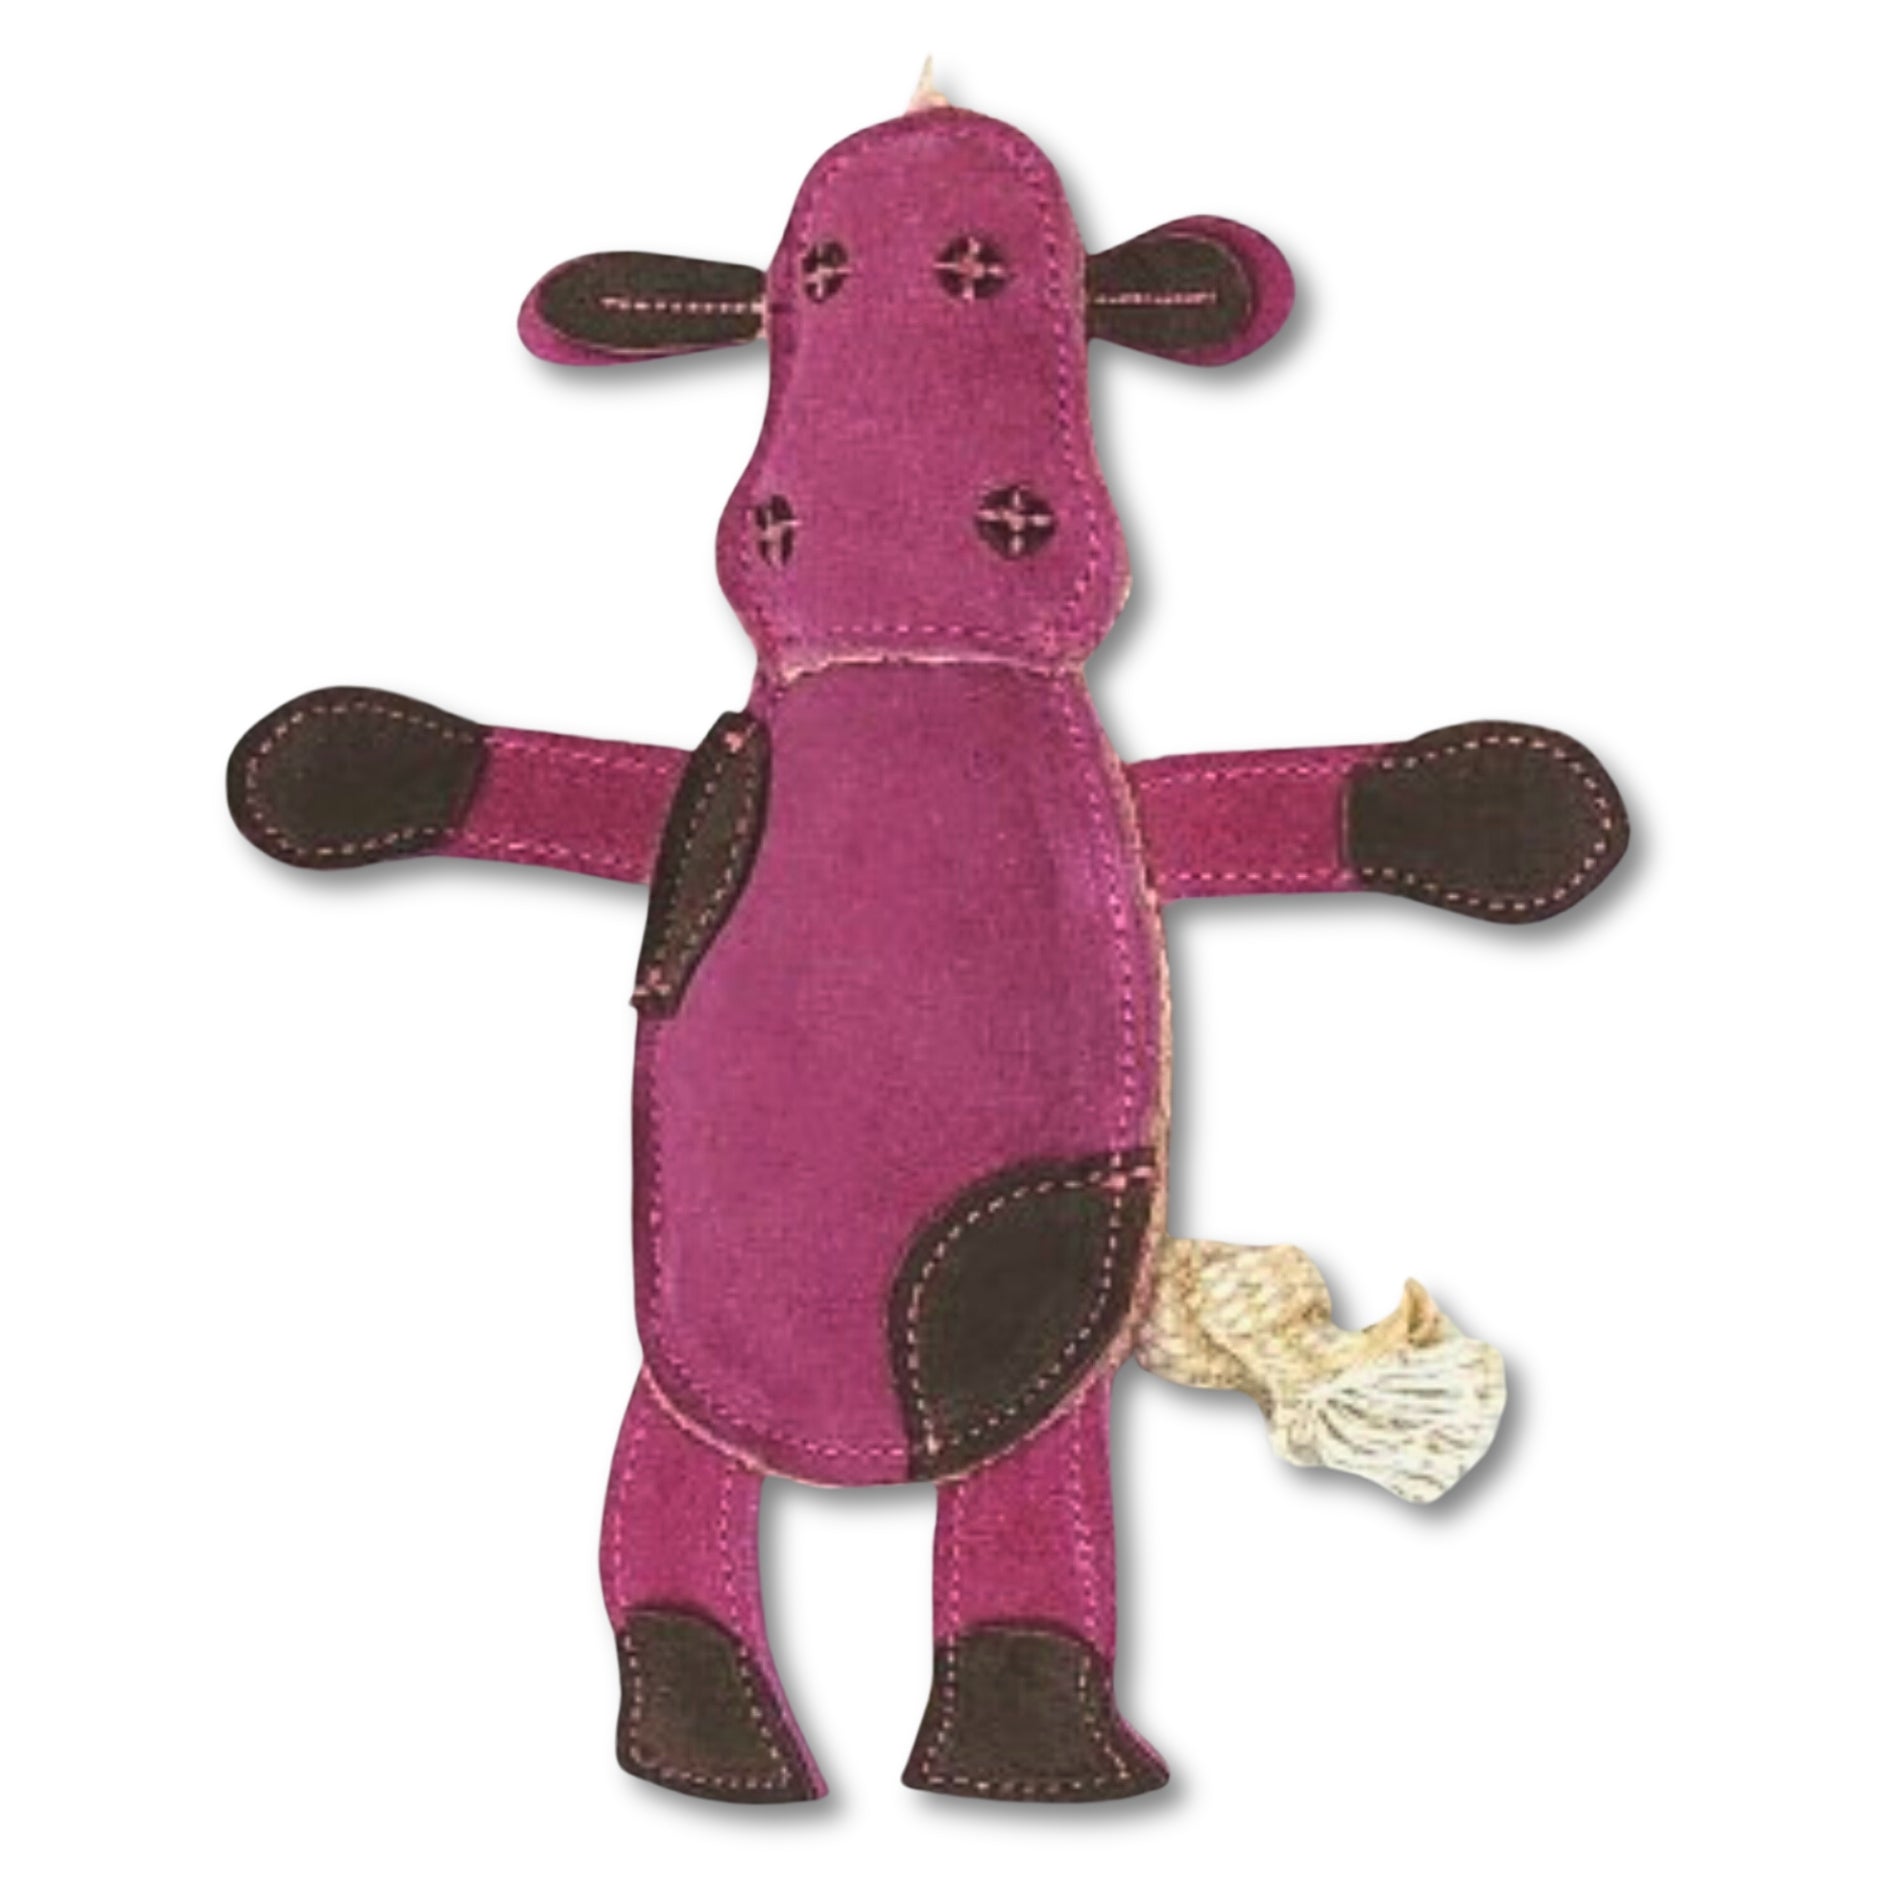 A Cheryl the Cow - Pink compostable chewtoy by Georgie Paws.